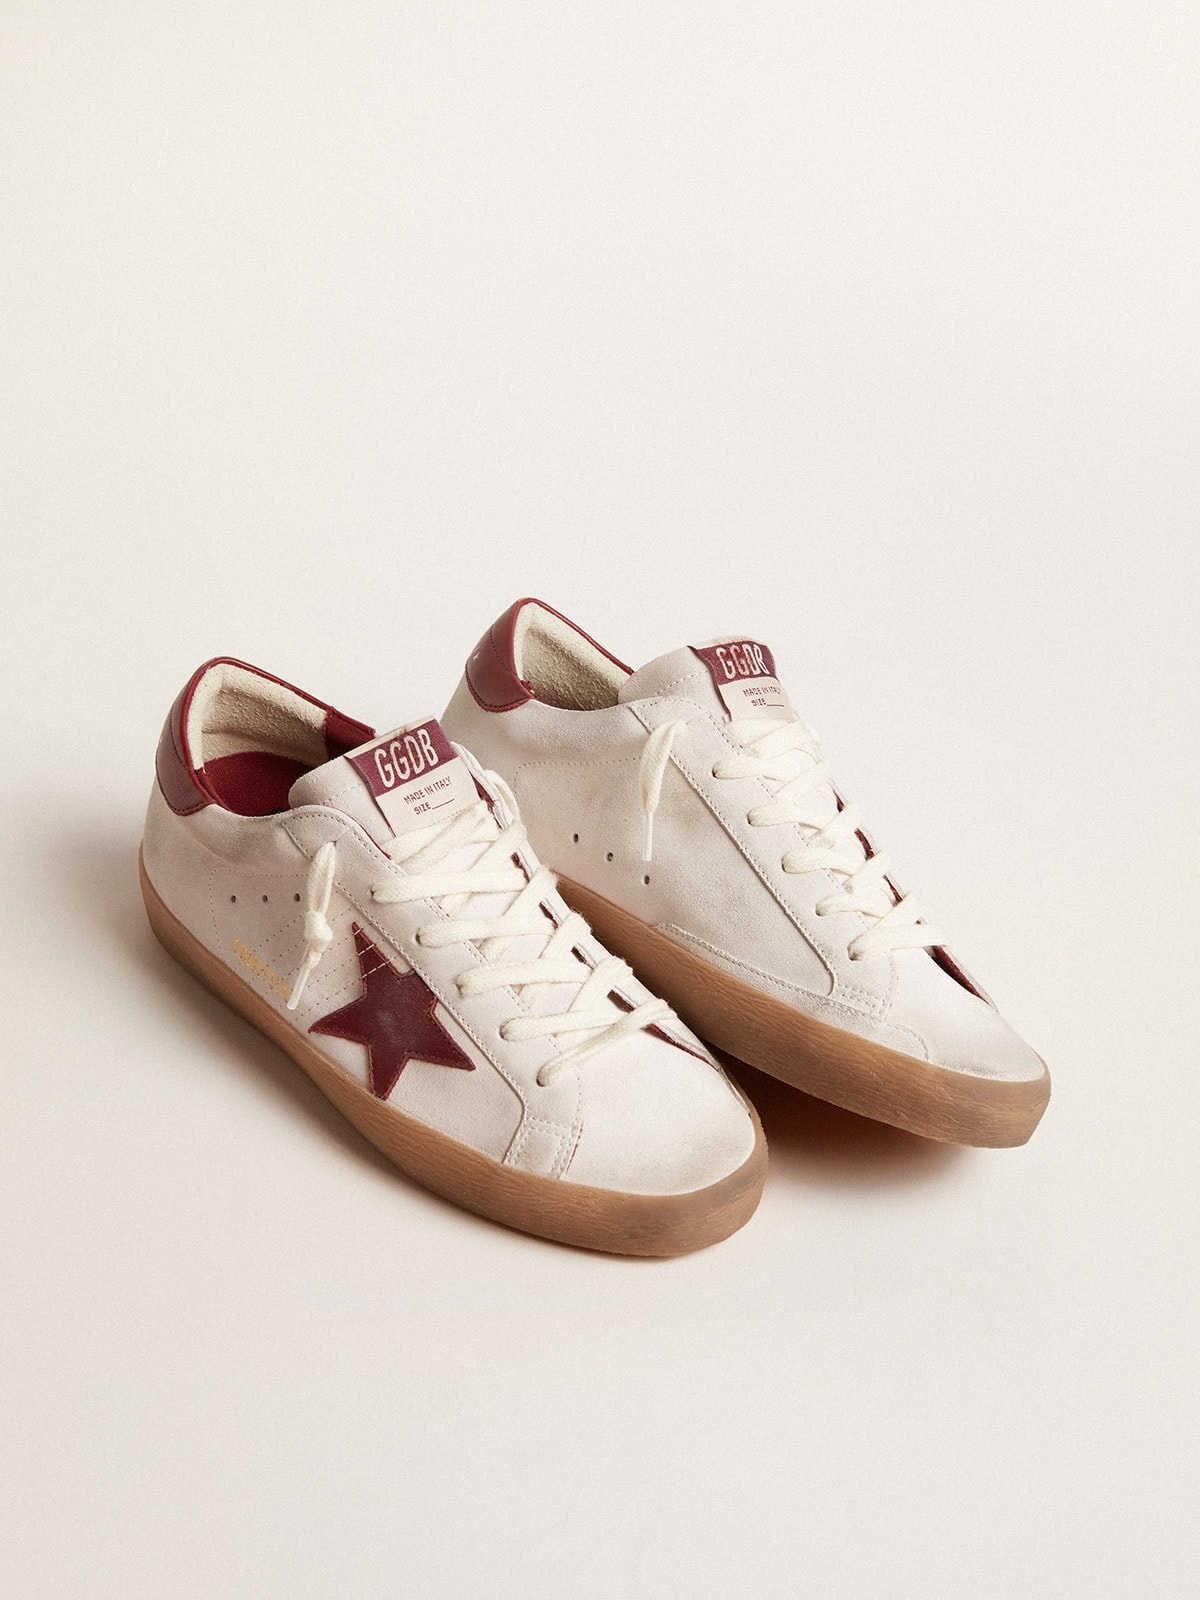 Super-Star in white suede with burgundy leather star and heel tab - 2